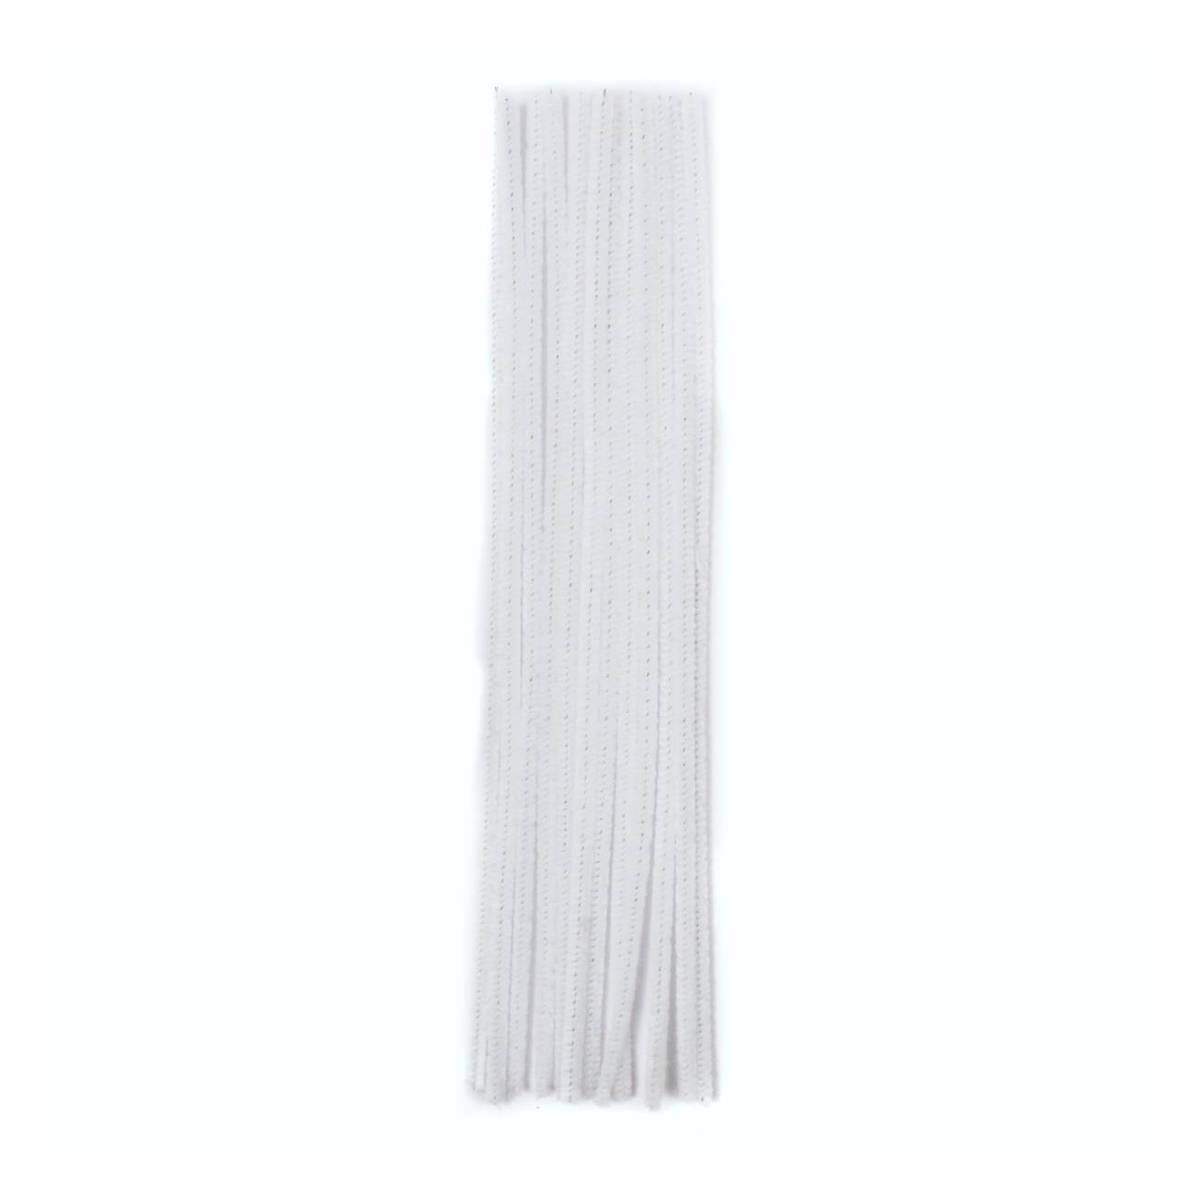 Chenille Stems White 3mm 12 Inch 8 Pack 